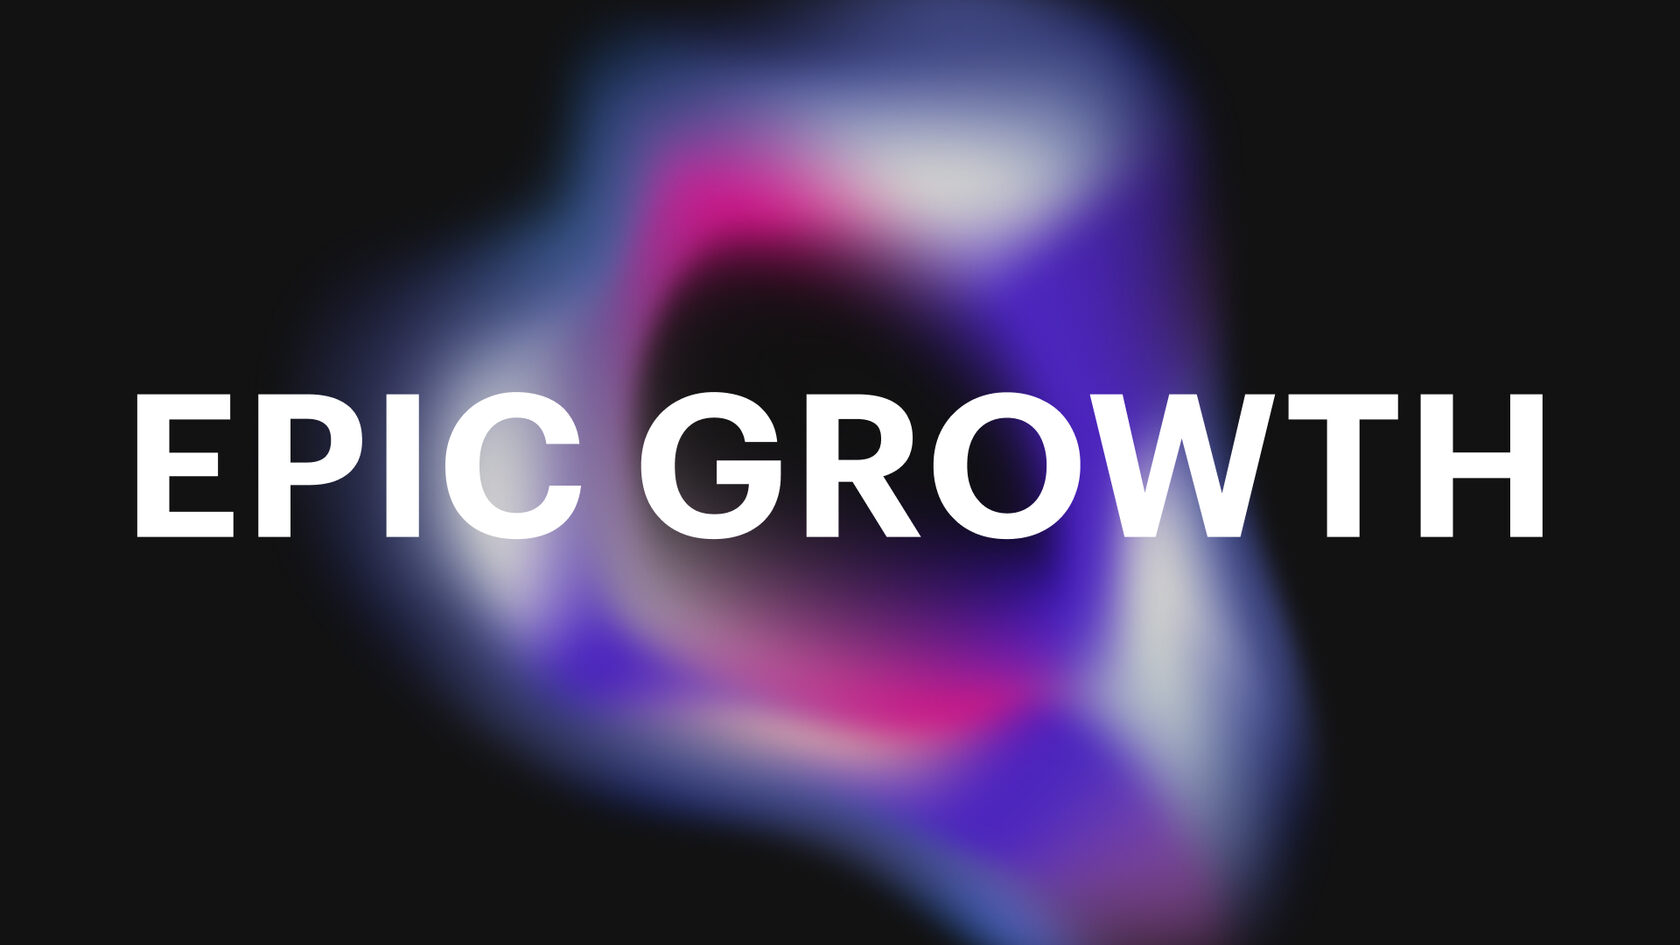 Epic Growth